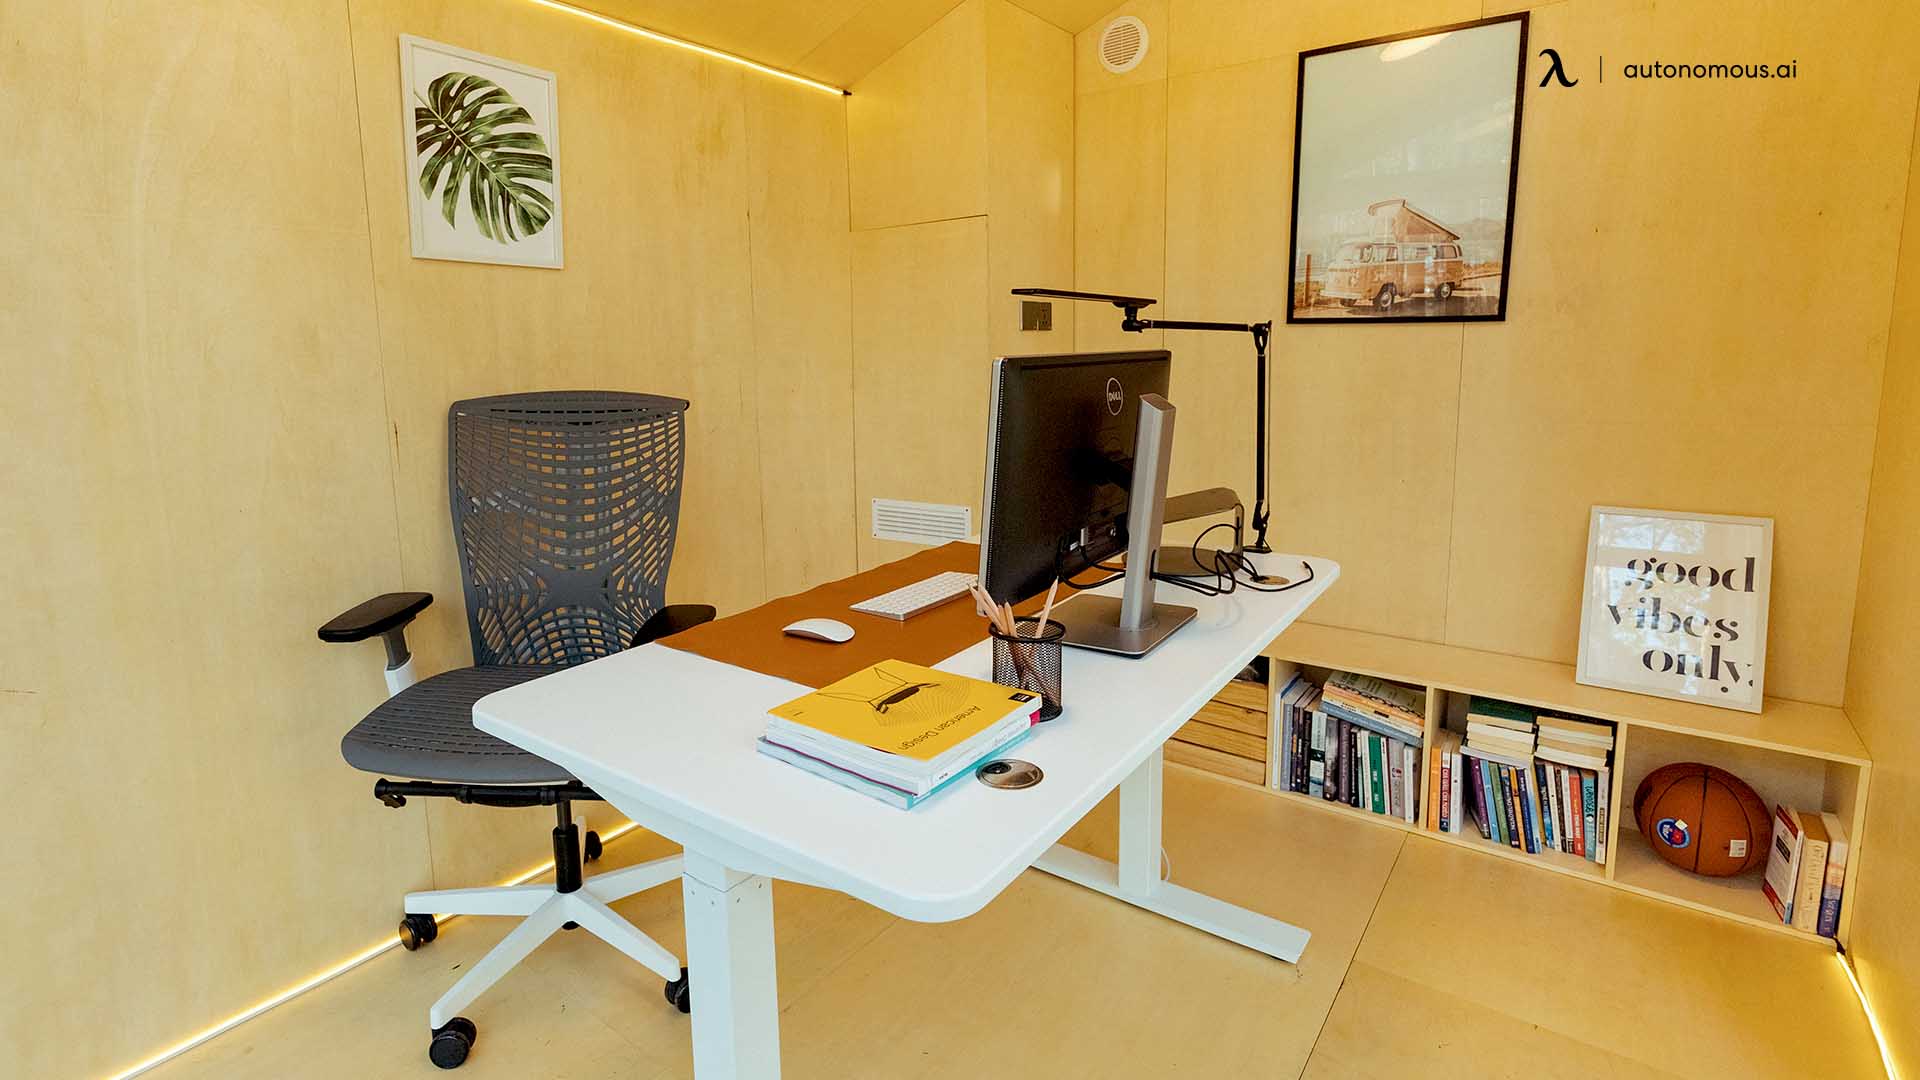 The Trendiest Office Wall Décor for a Creative and Productive Workspace